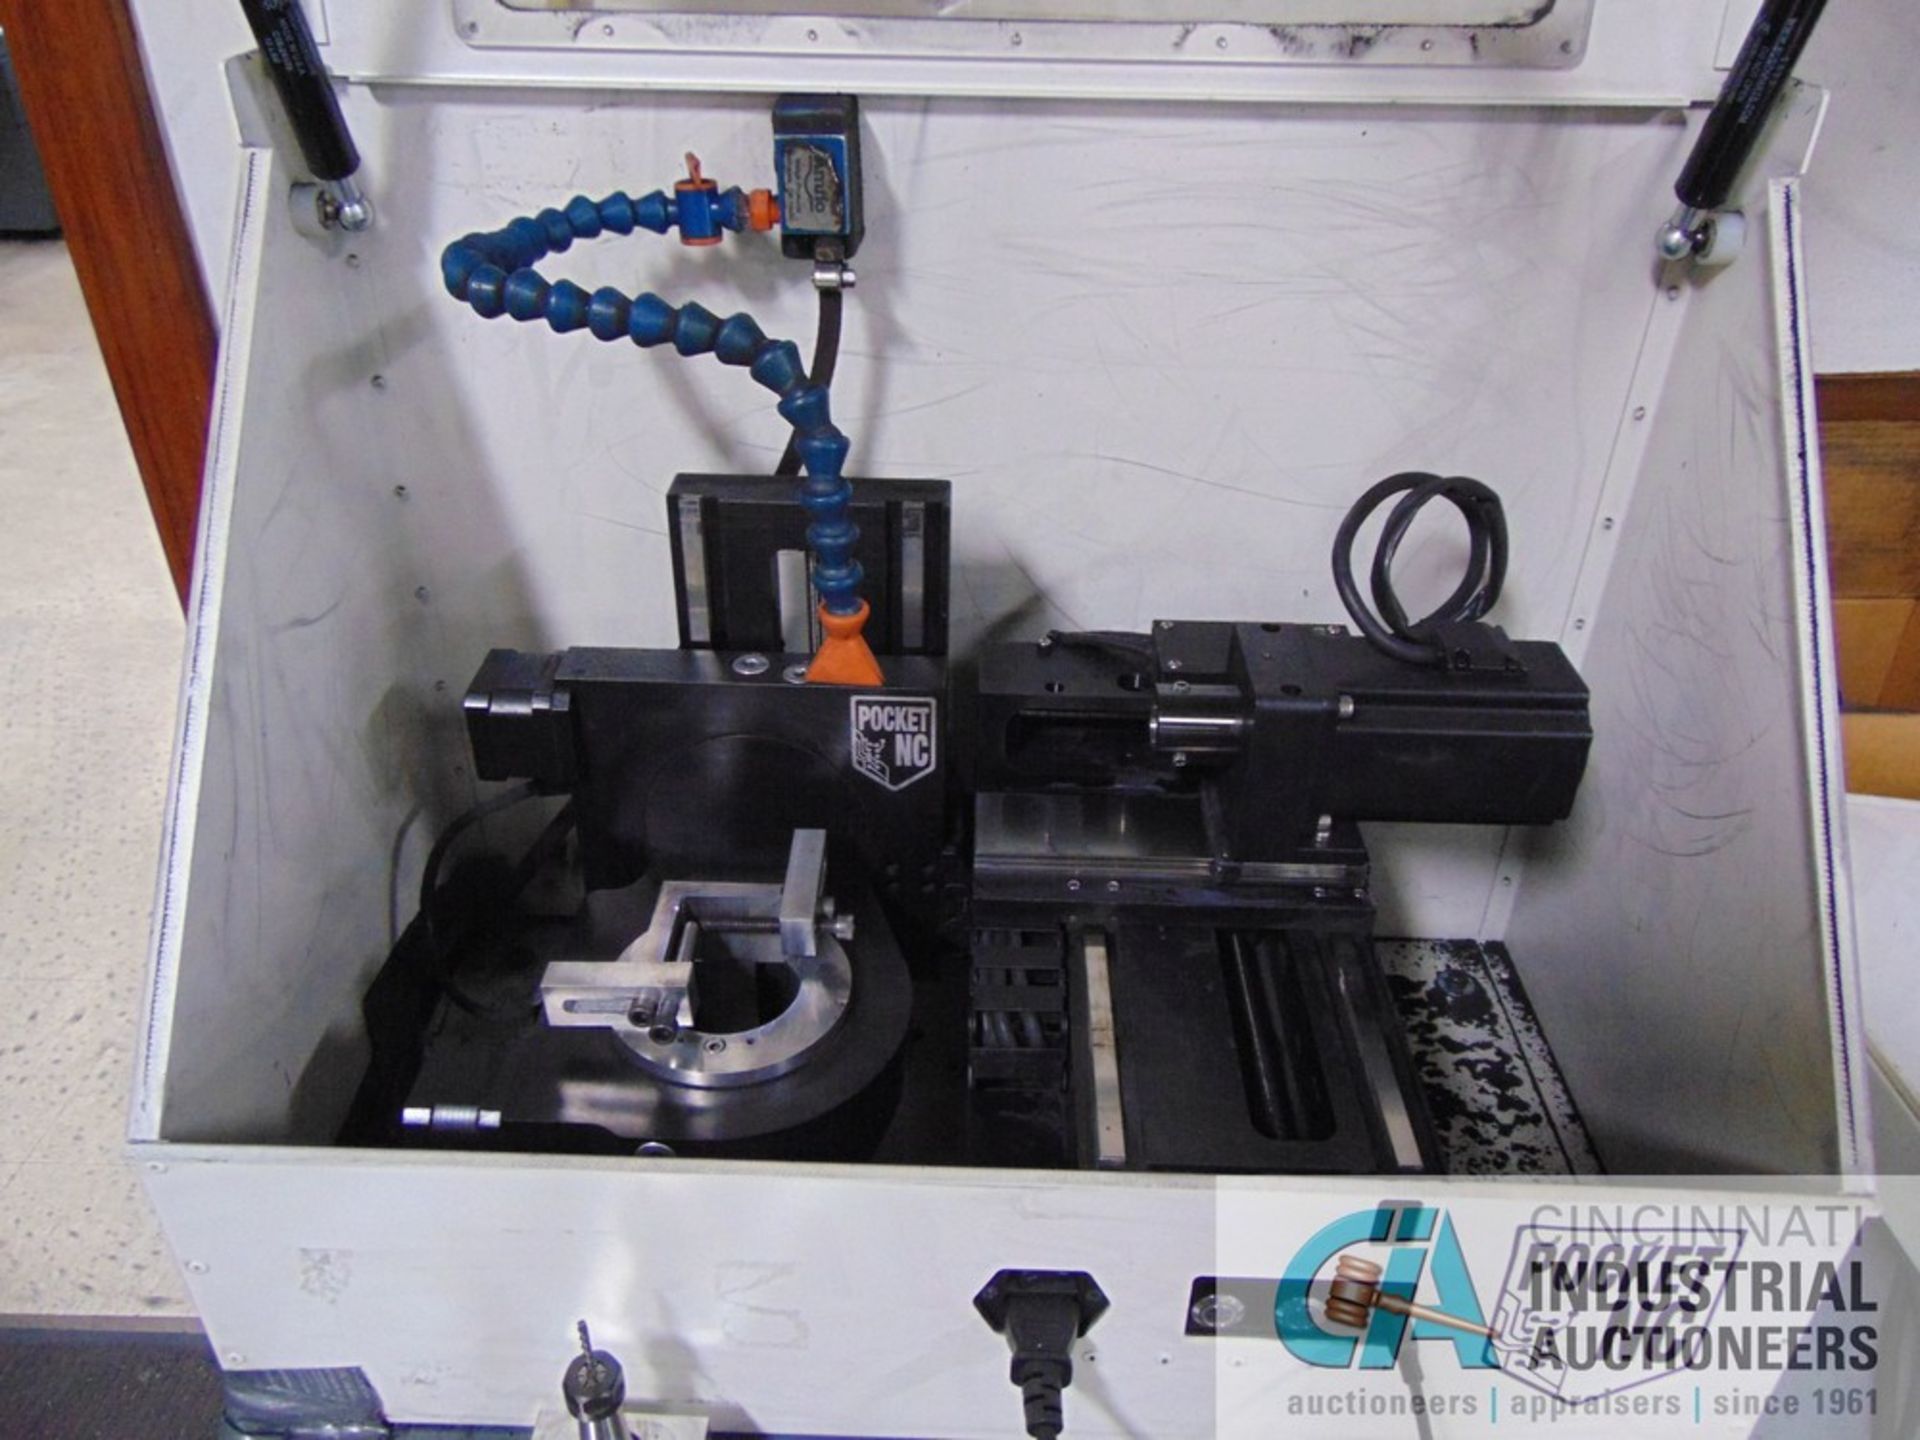 POCKET NC FIVE-AXIS CNC TABLE TOP HORIZONTAL MILL W/ LAPTOP & DCE UMA72G1 DUST COLLECTOR - Image 2 of 5